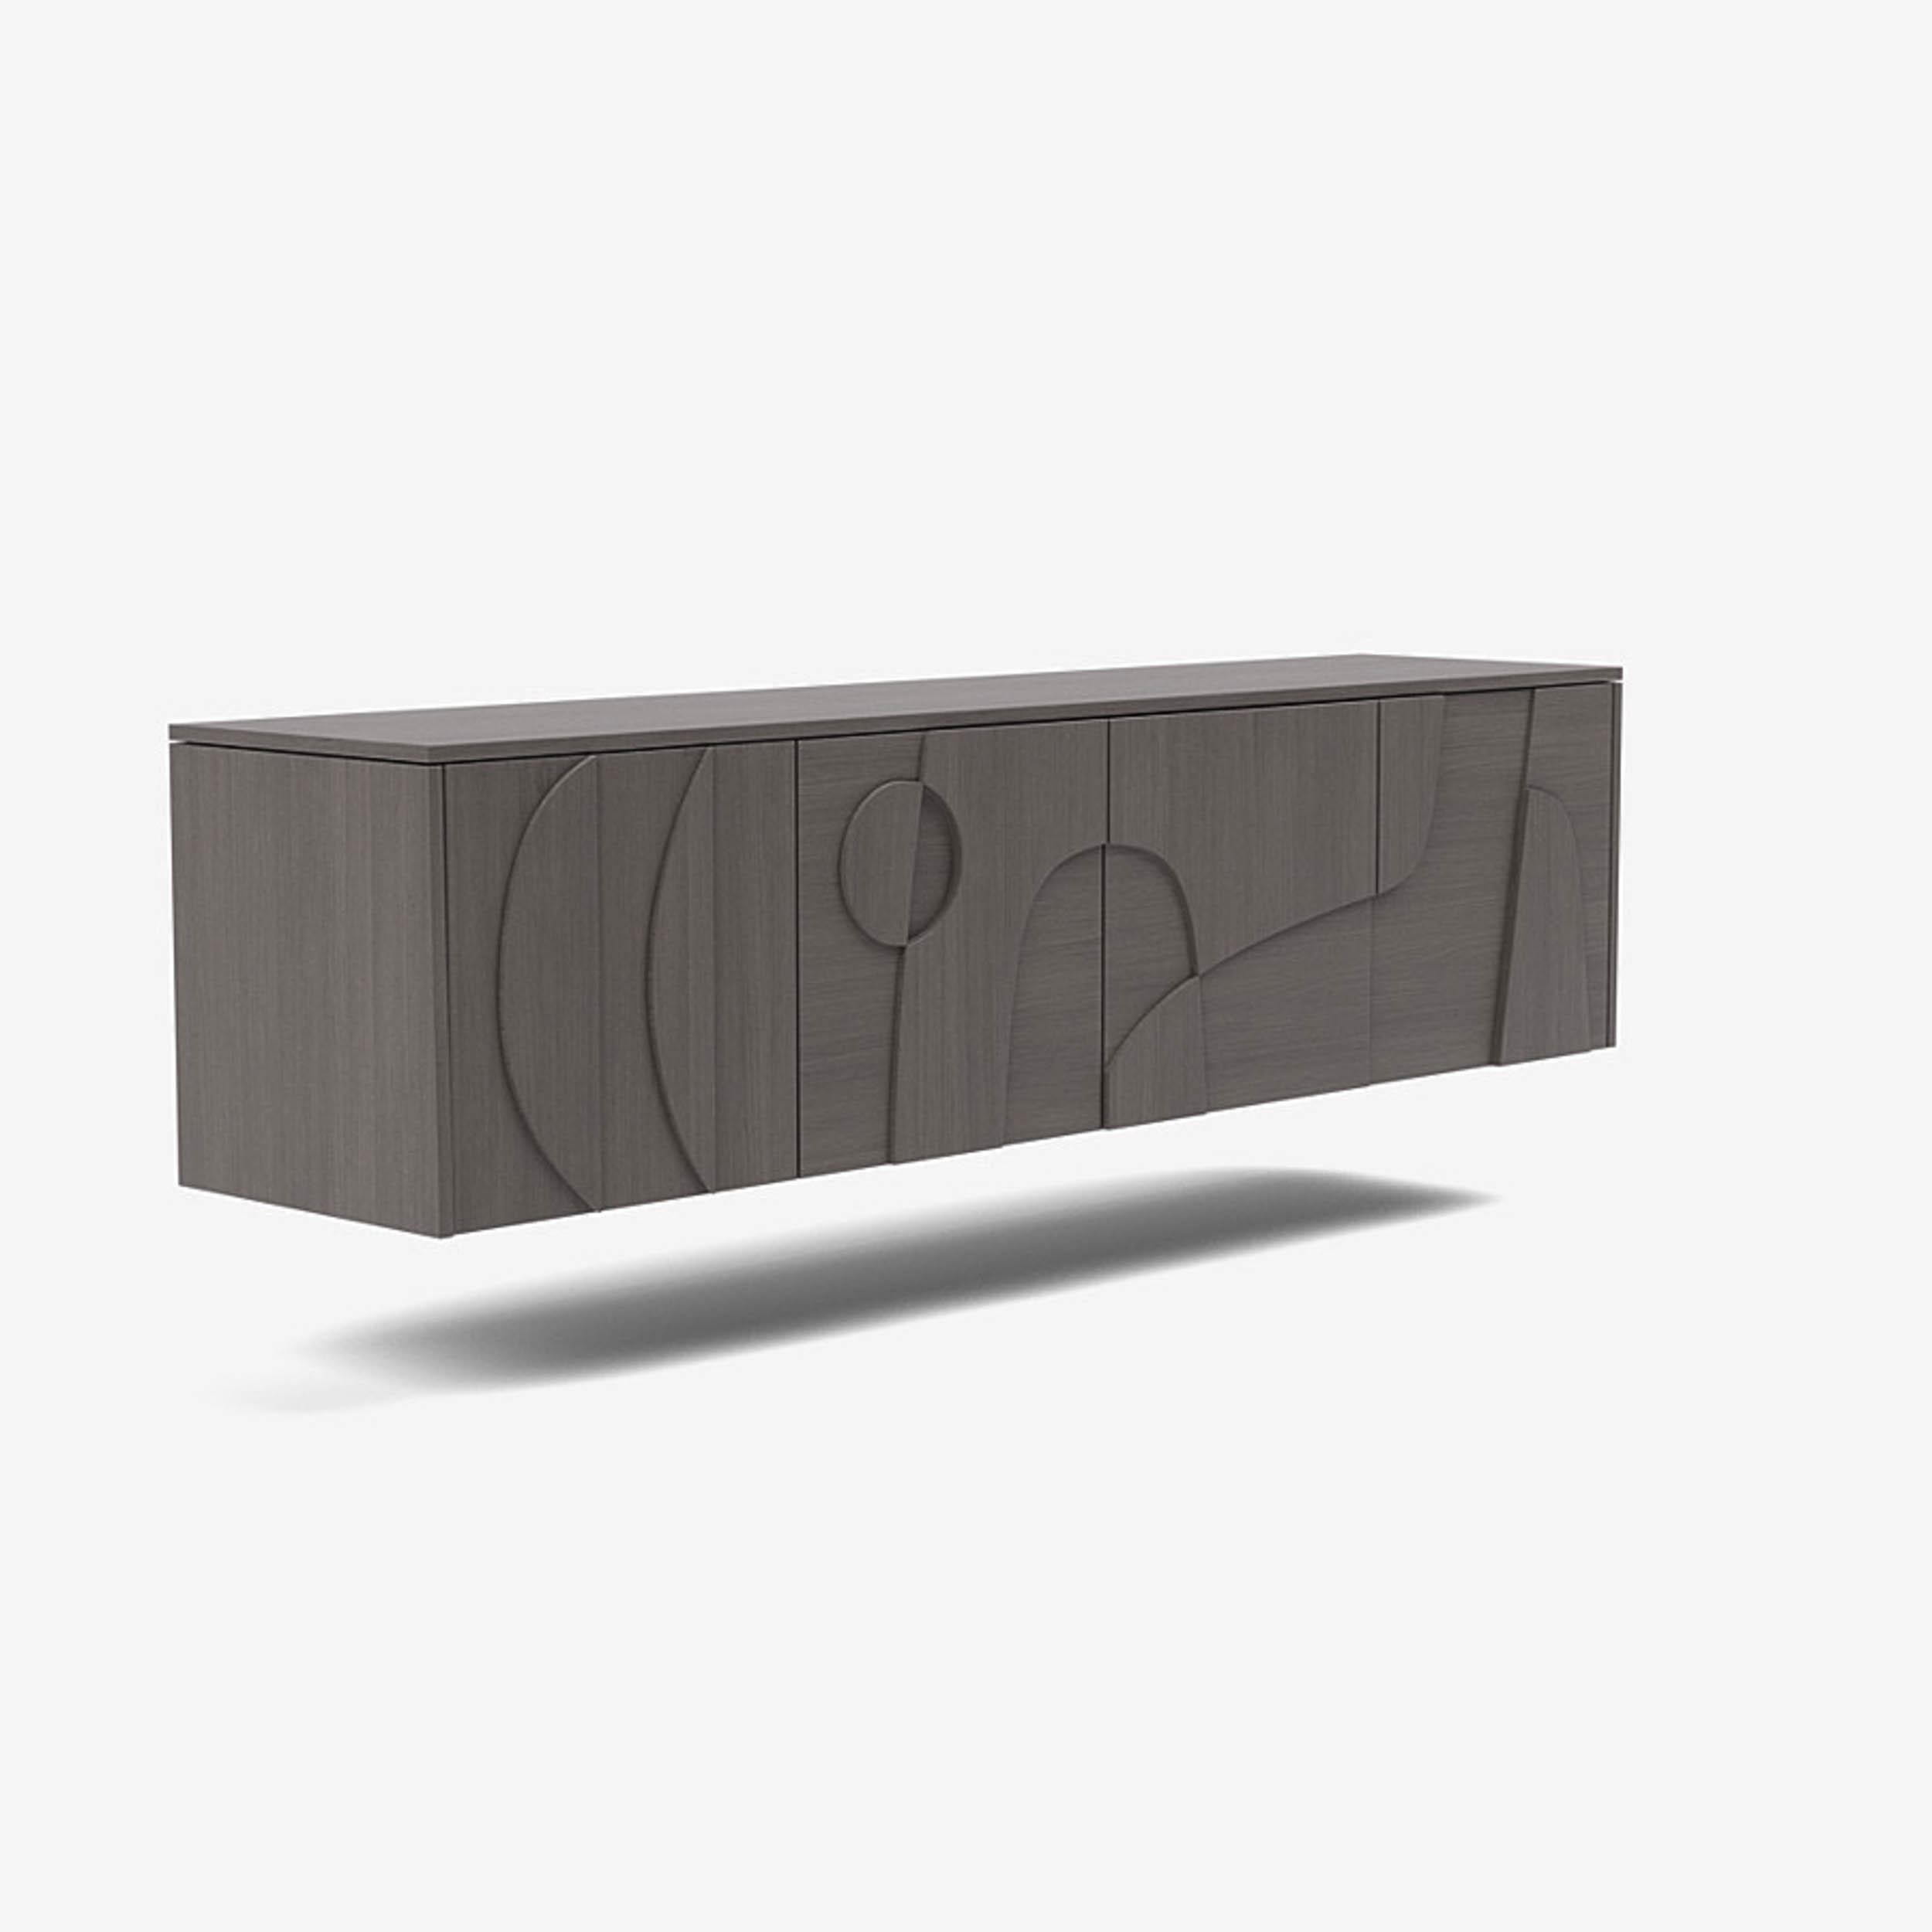 Contemporary 'Wynwood' 4 Sideboard by Man of Parts, Whiskey Oak, Short Legs For Sale 5